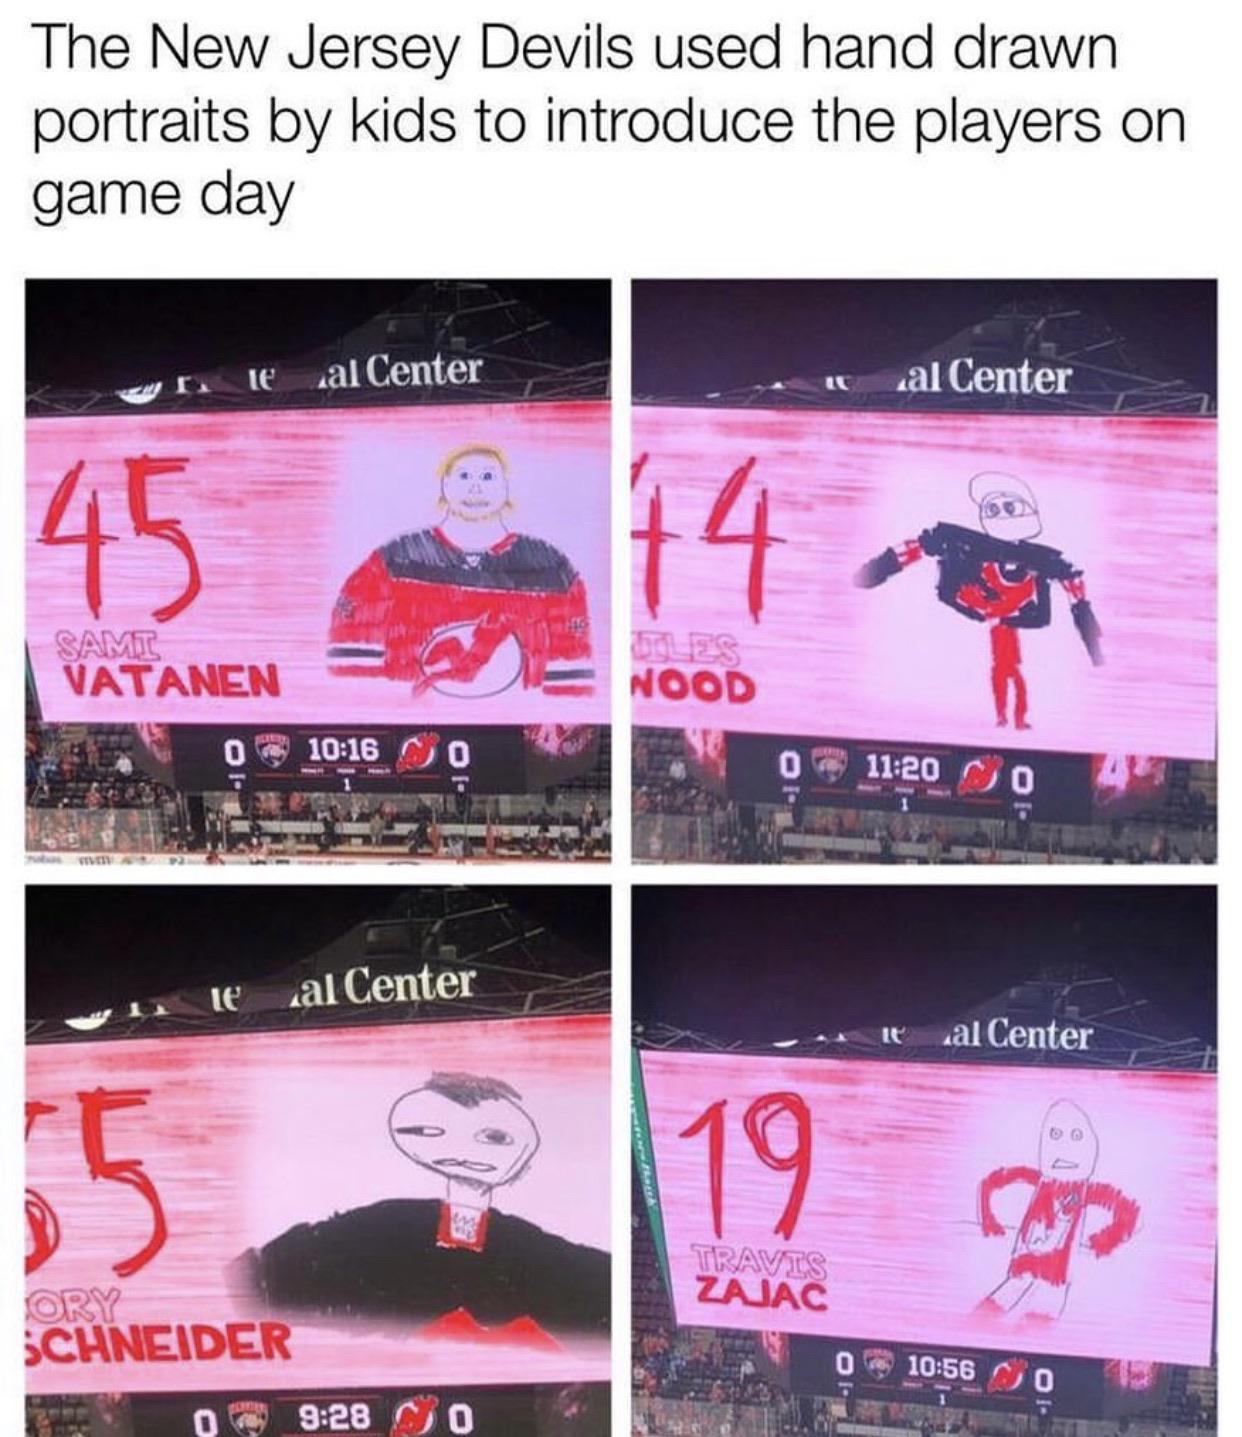 poster - The New Jersey Devils used hand drawn portraits by kids to introduce the players on game day Le al Center al Center Samt Vatanen Nood 0 Ult Le al Center al Center | Travis Zajac Ory Schneider O 0 O 0